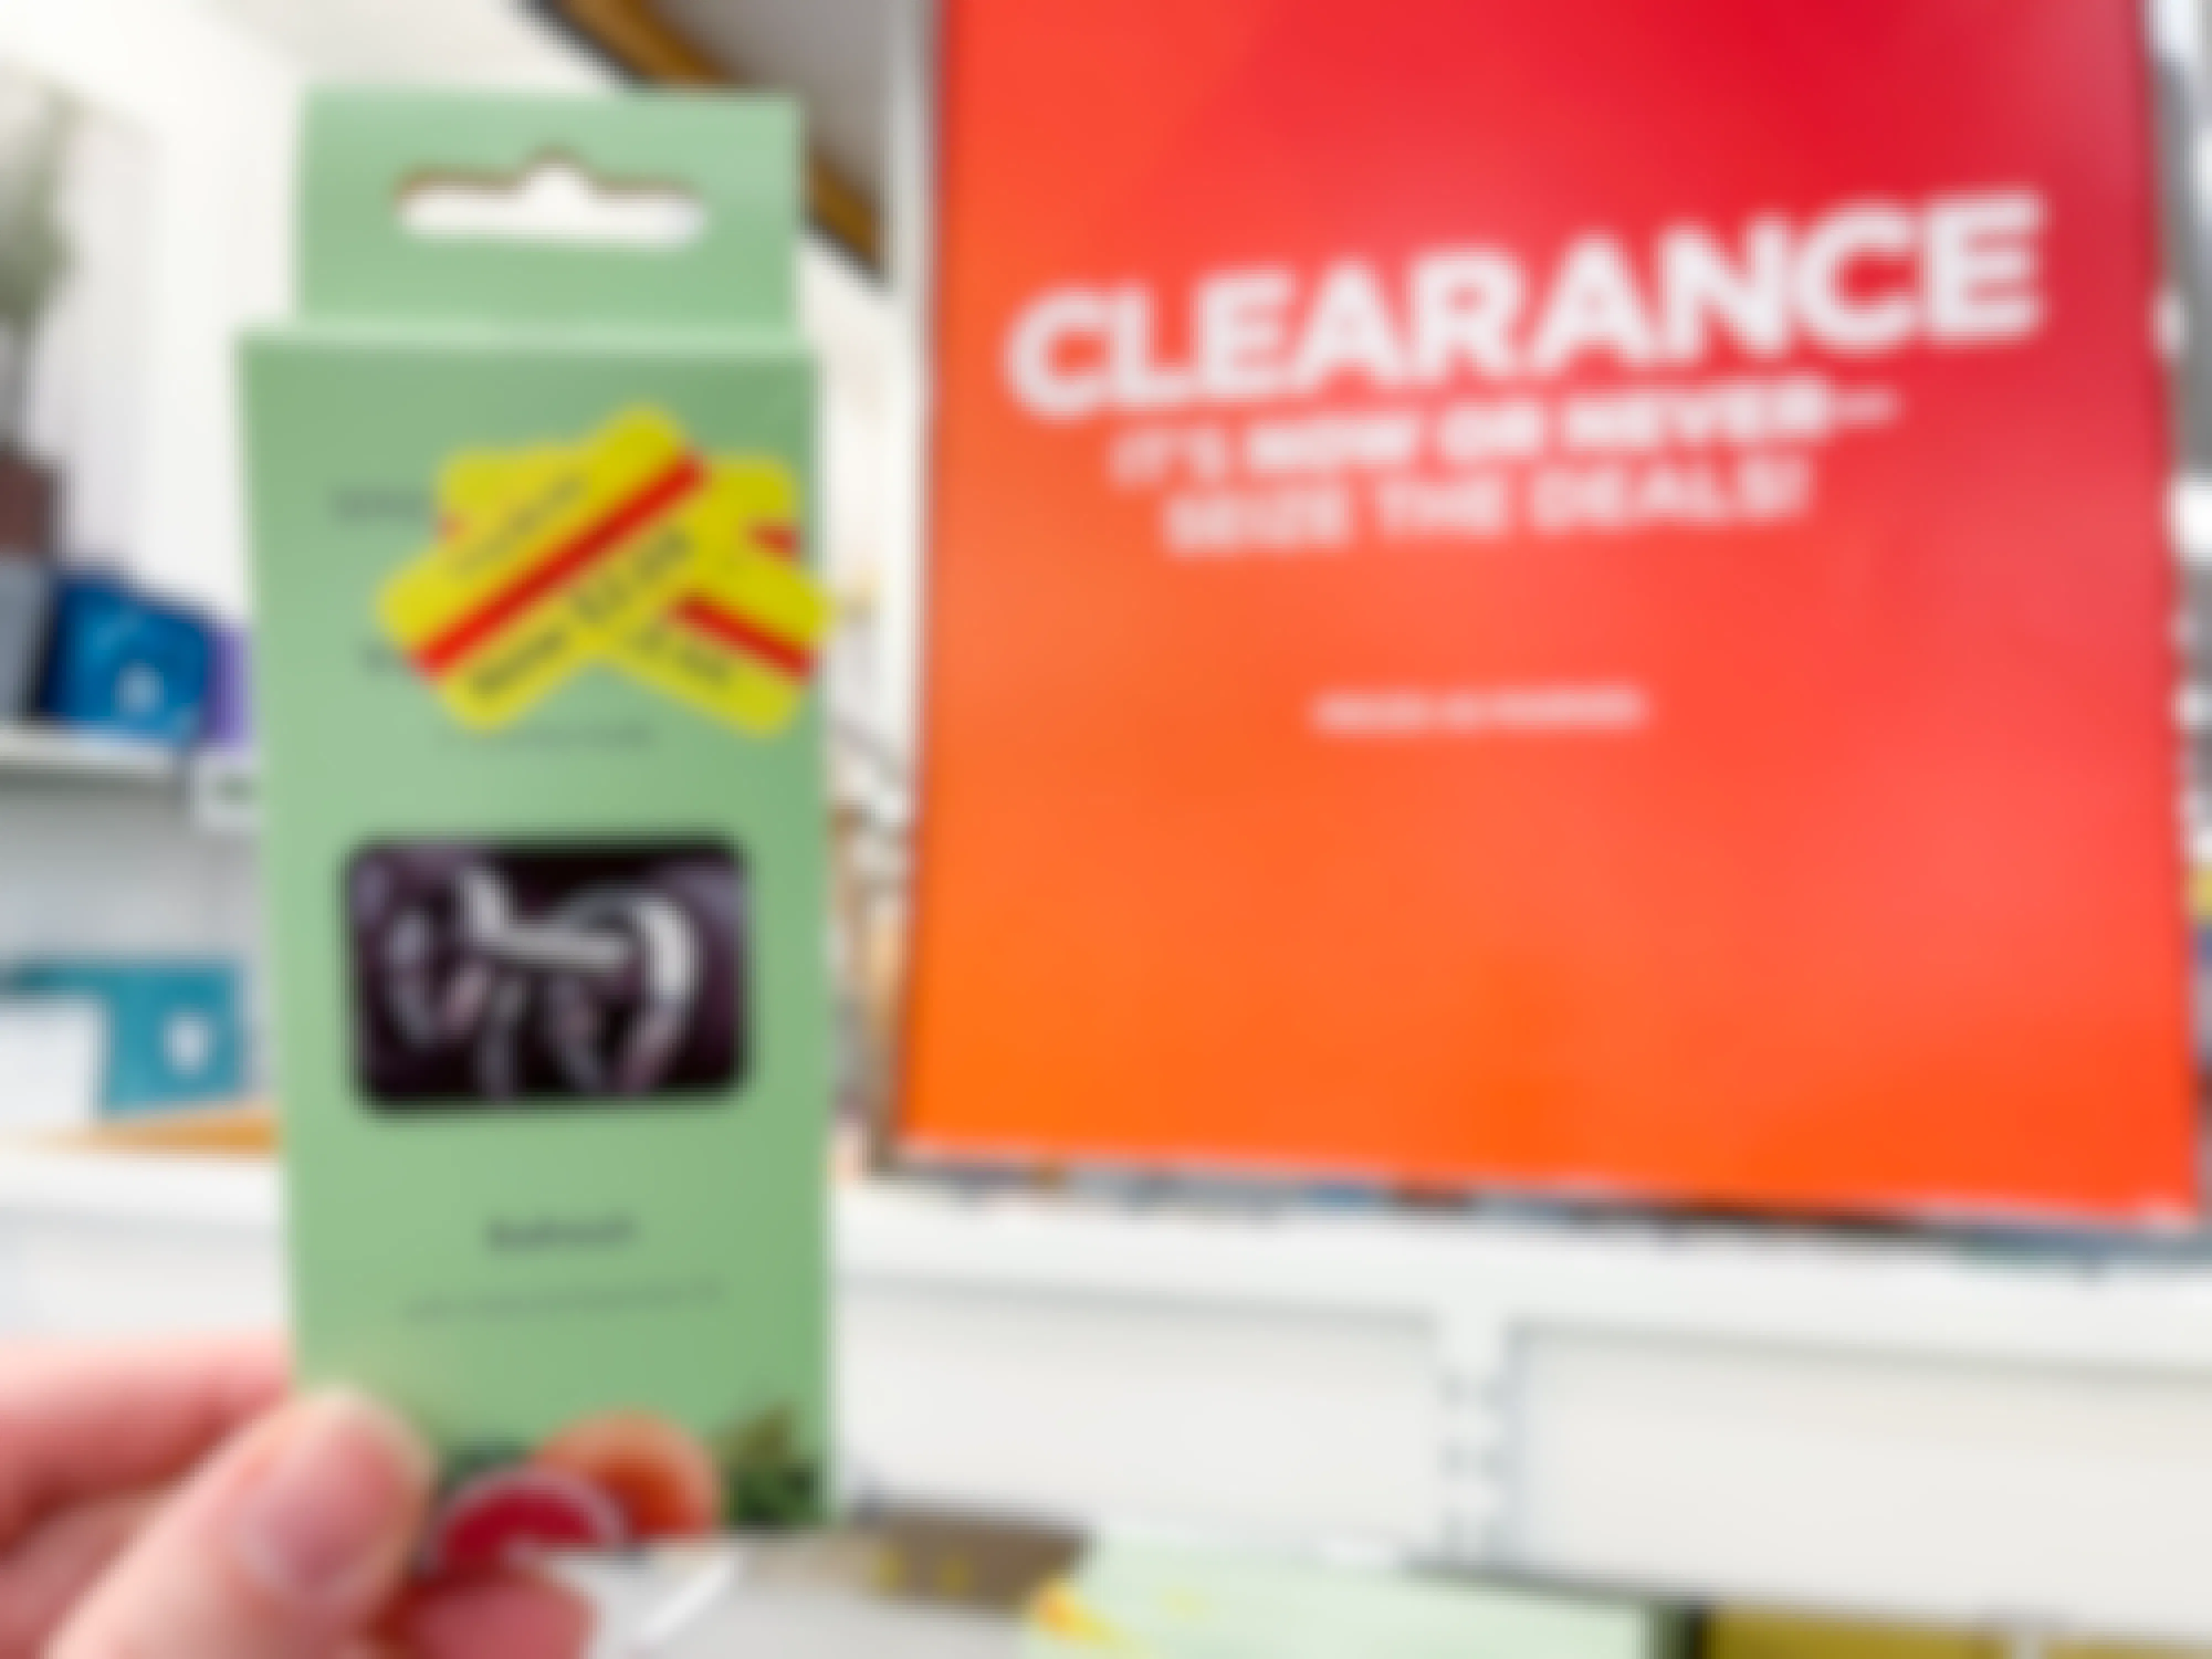 A bunch of clearance stickers on the front of a package held up next to a clearance sign.